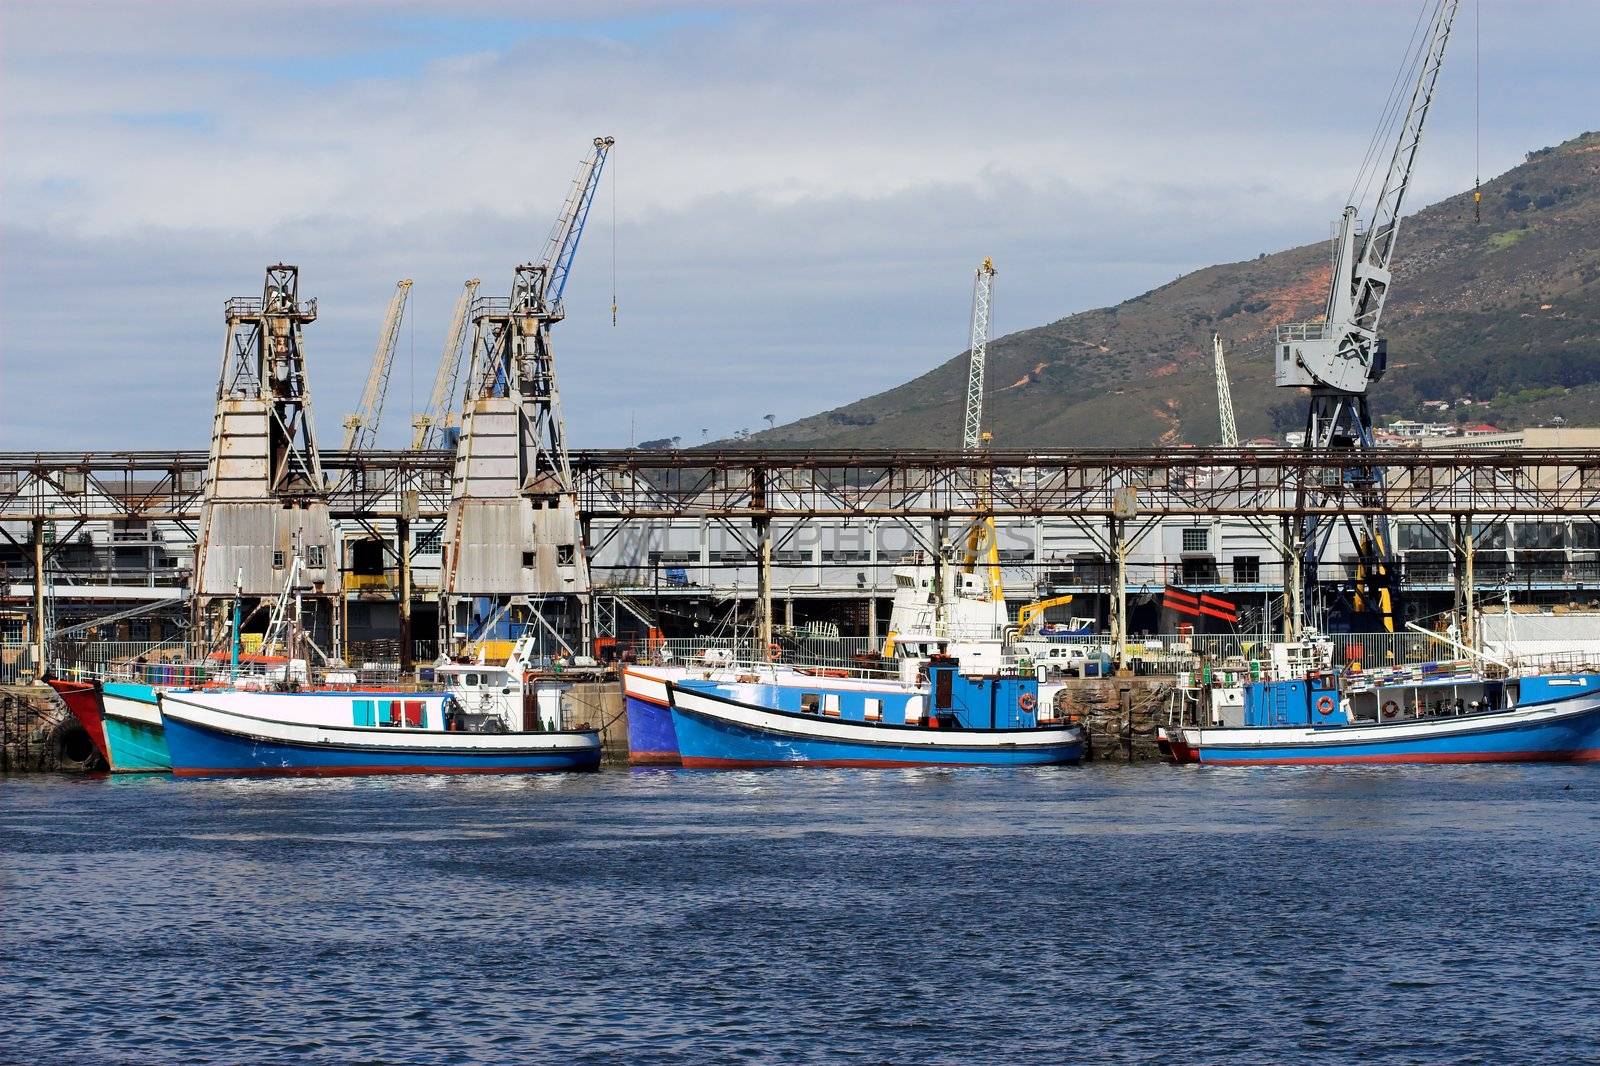 Colorful Fishing boats moored in the harbour